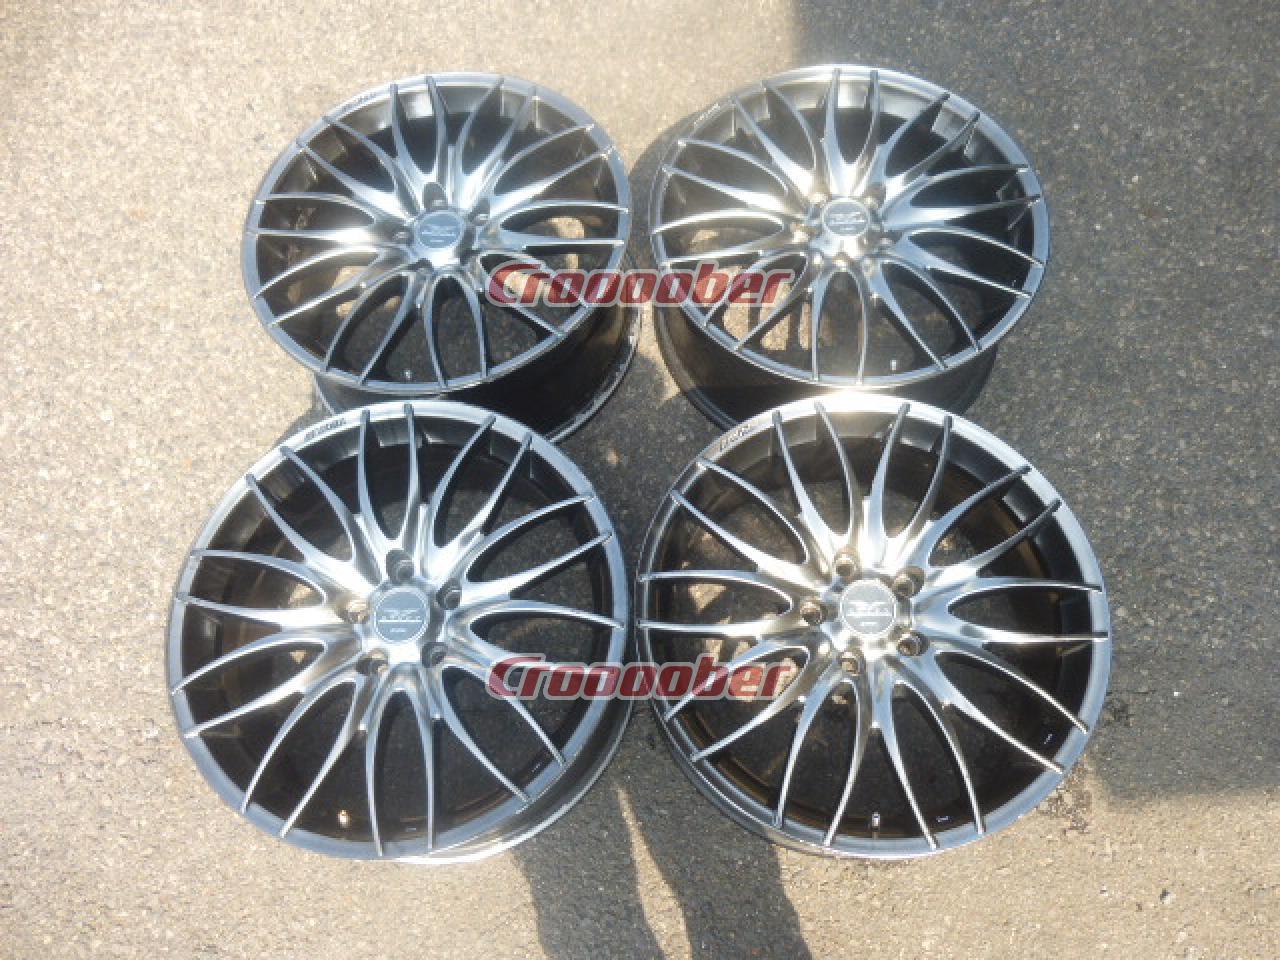 WORK STEEZ NICROSS 18 Inches Wheel 4 Pieces Set R05345 - 7.5Jx18+ 